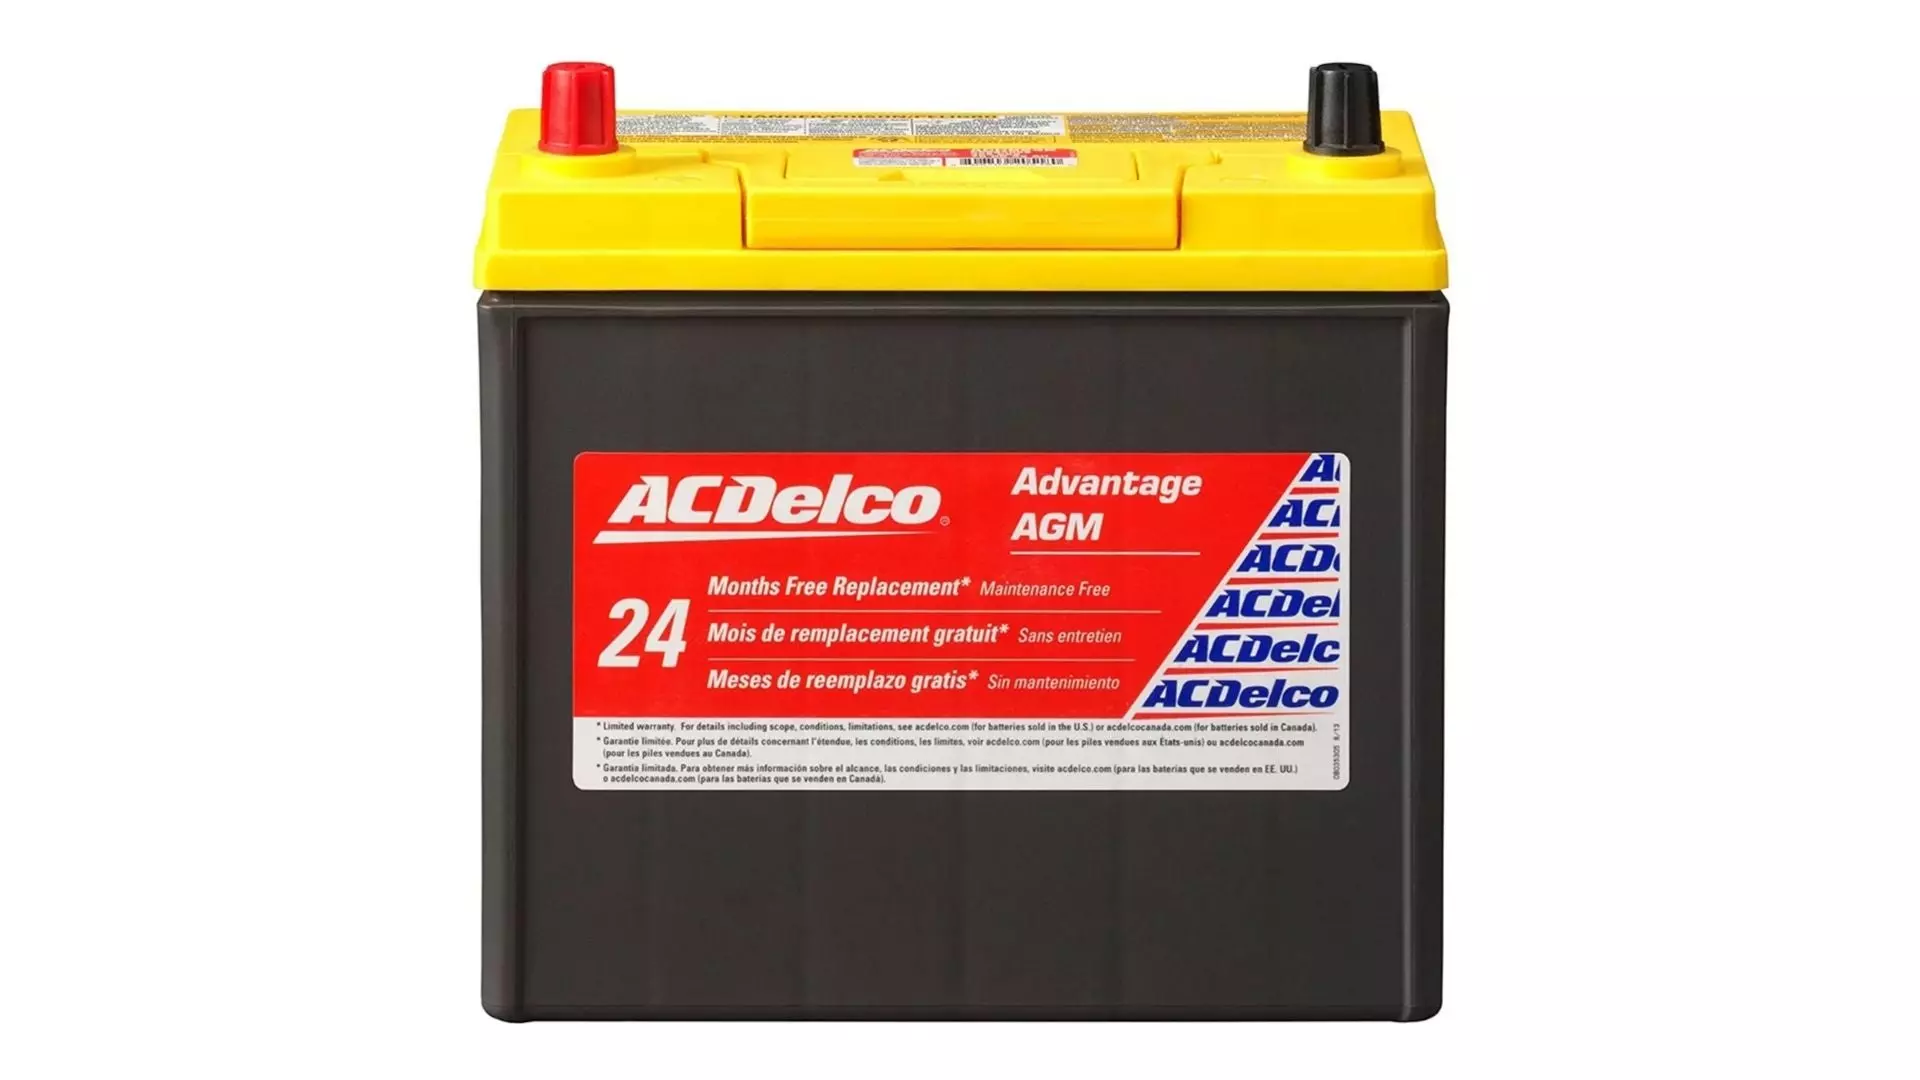 ACDelco Gold Hybrid Vehicle Battery